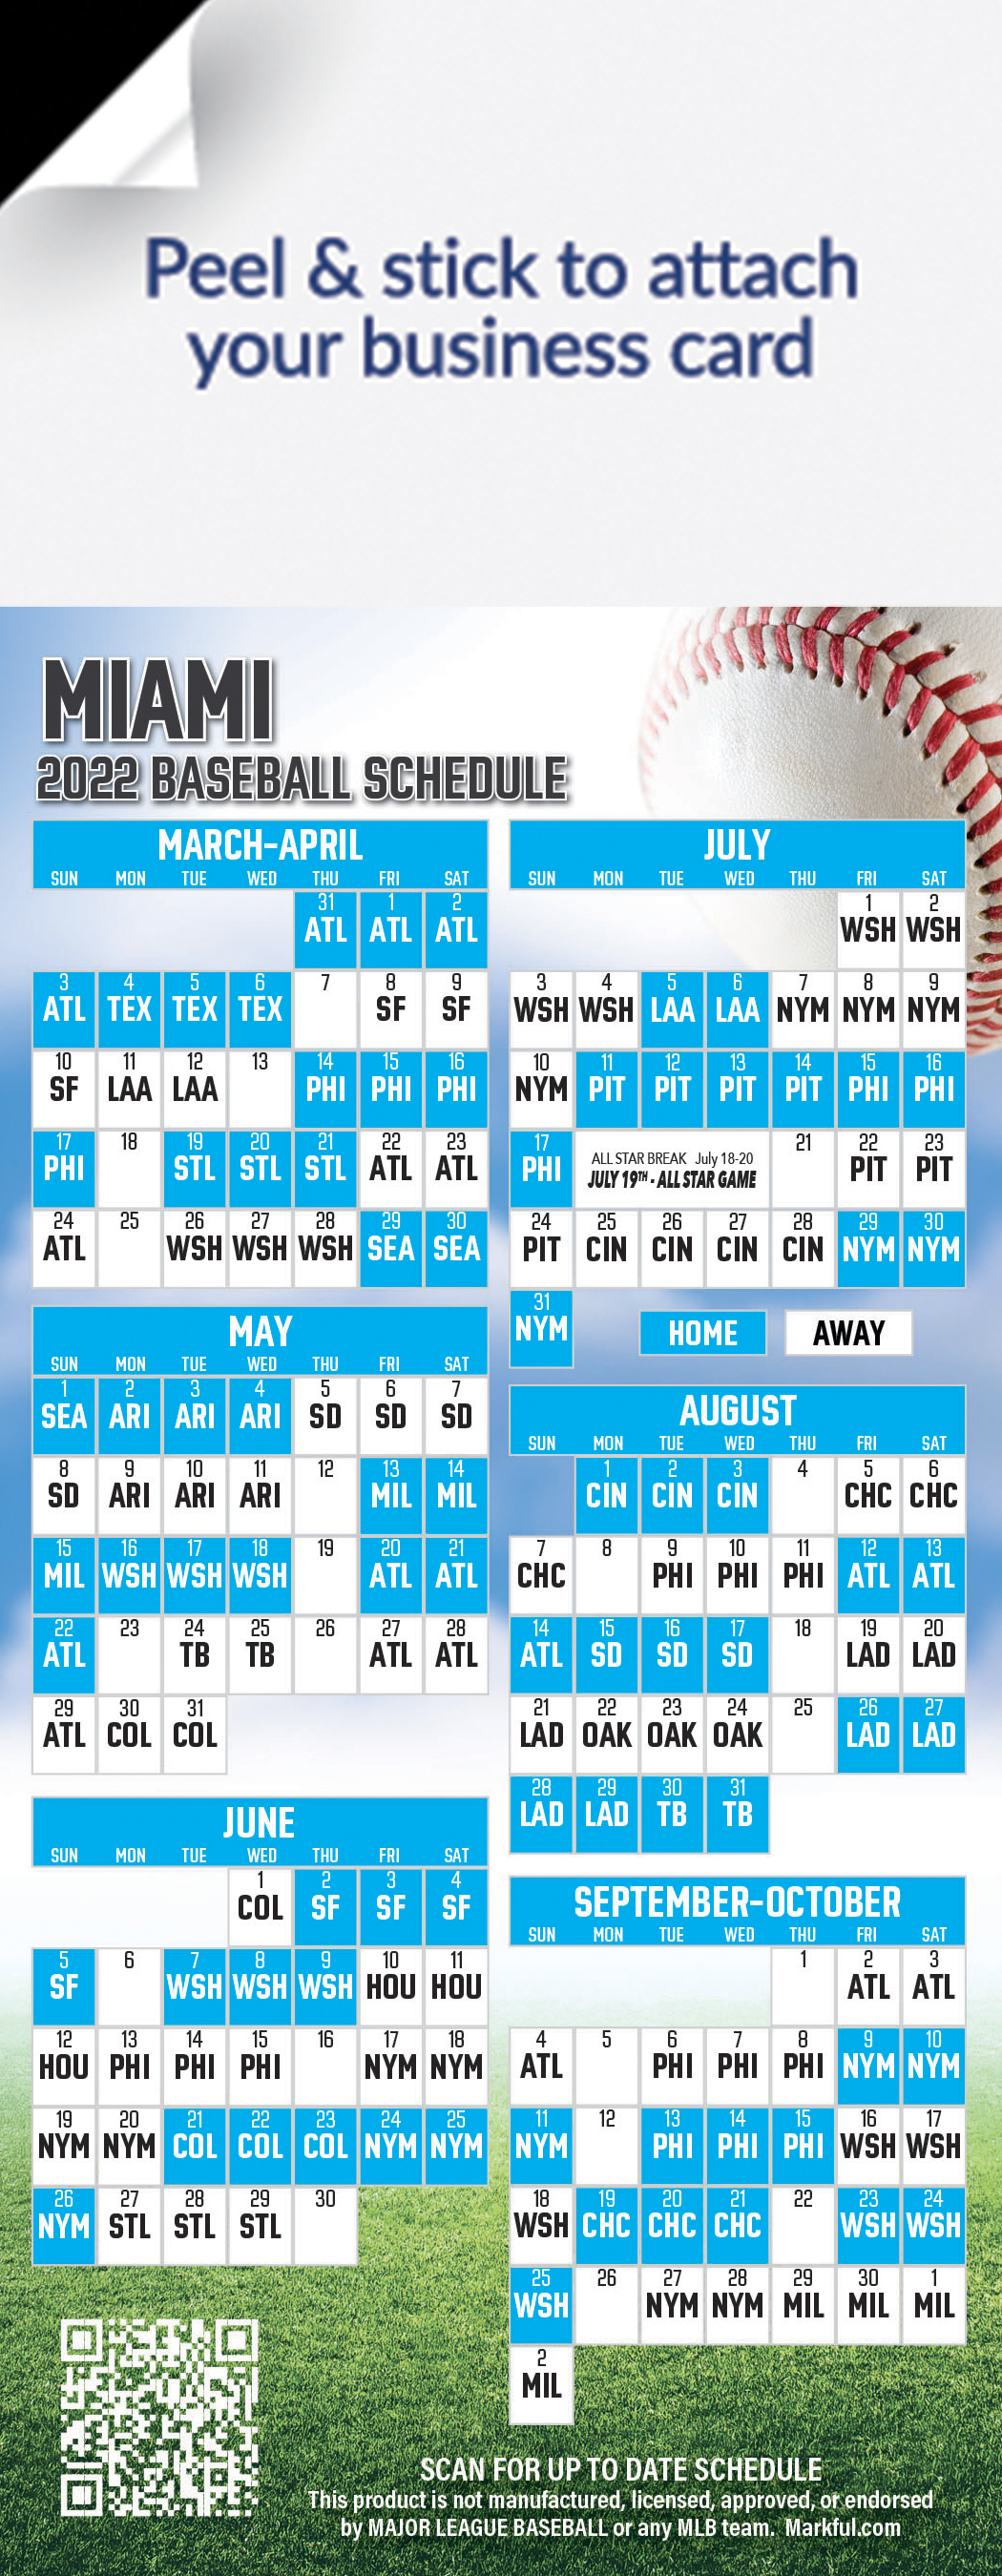 Marlins Schedule 2022 2022 Miami Marlins Schedule Magnets & Magnetic Schedules | Markful